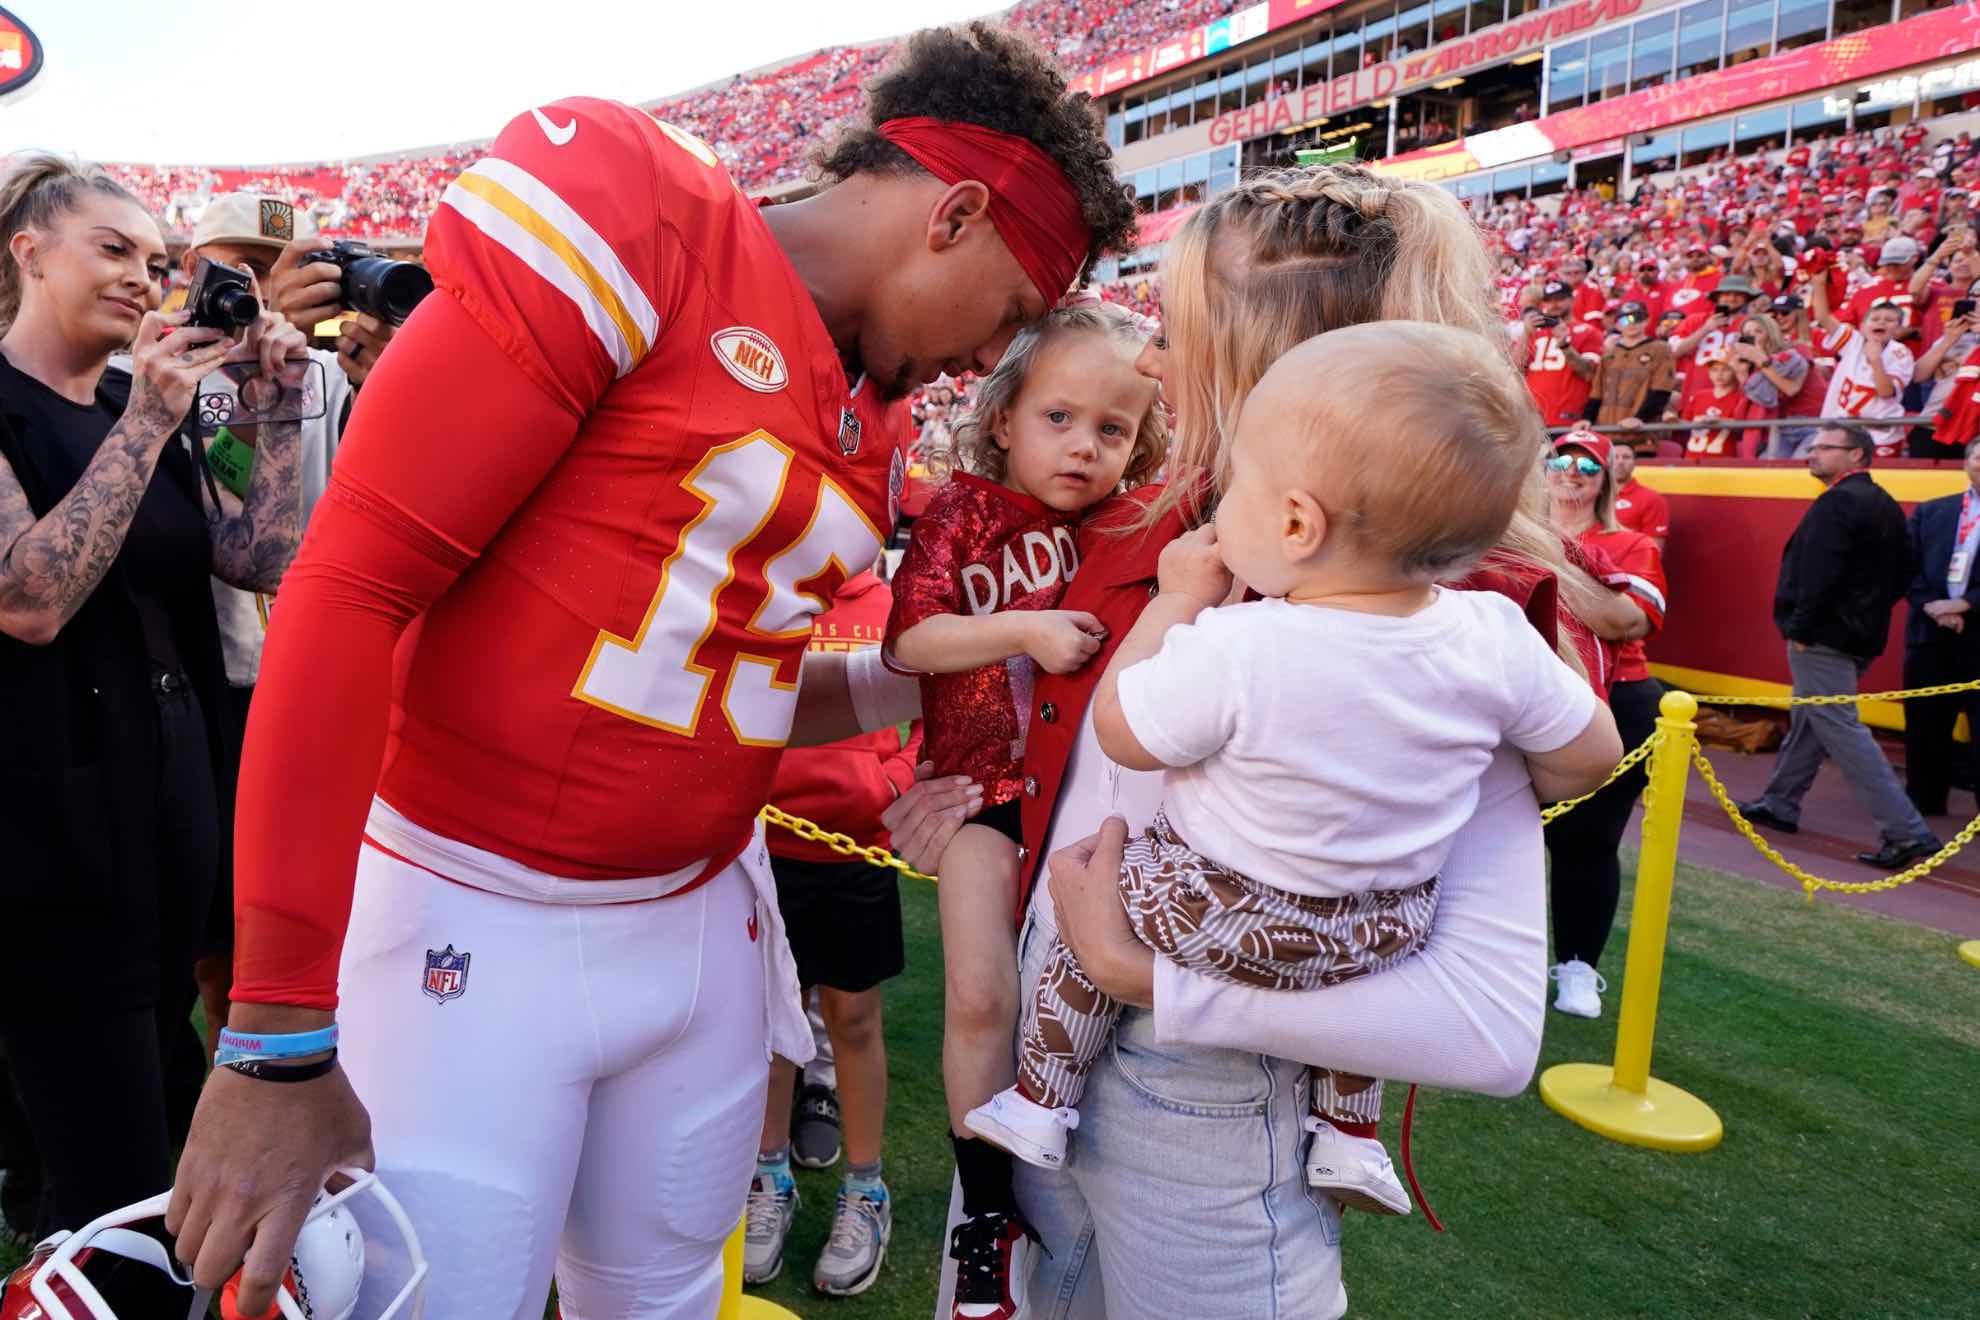 Sterling Mahomes News - Latest Sterling Mahomes News, Stats & Updates